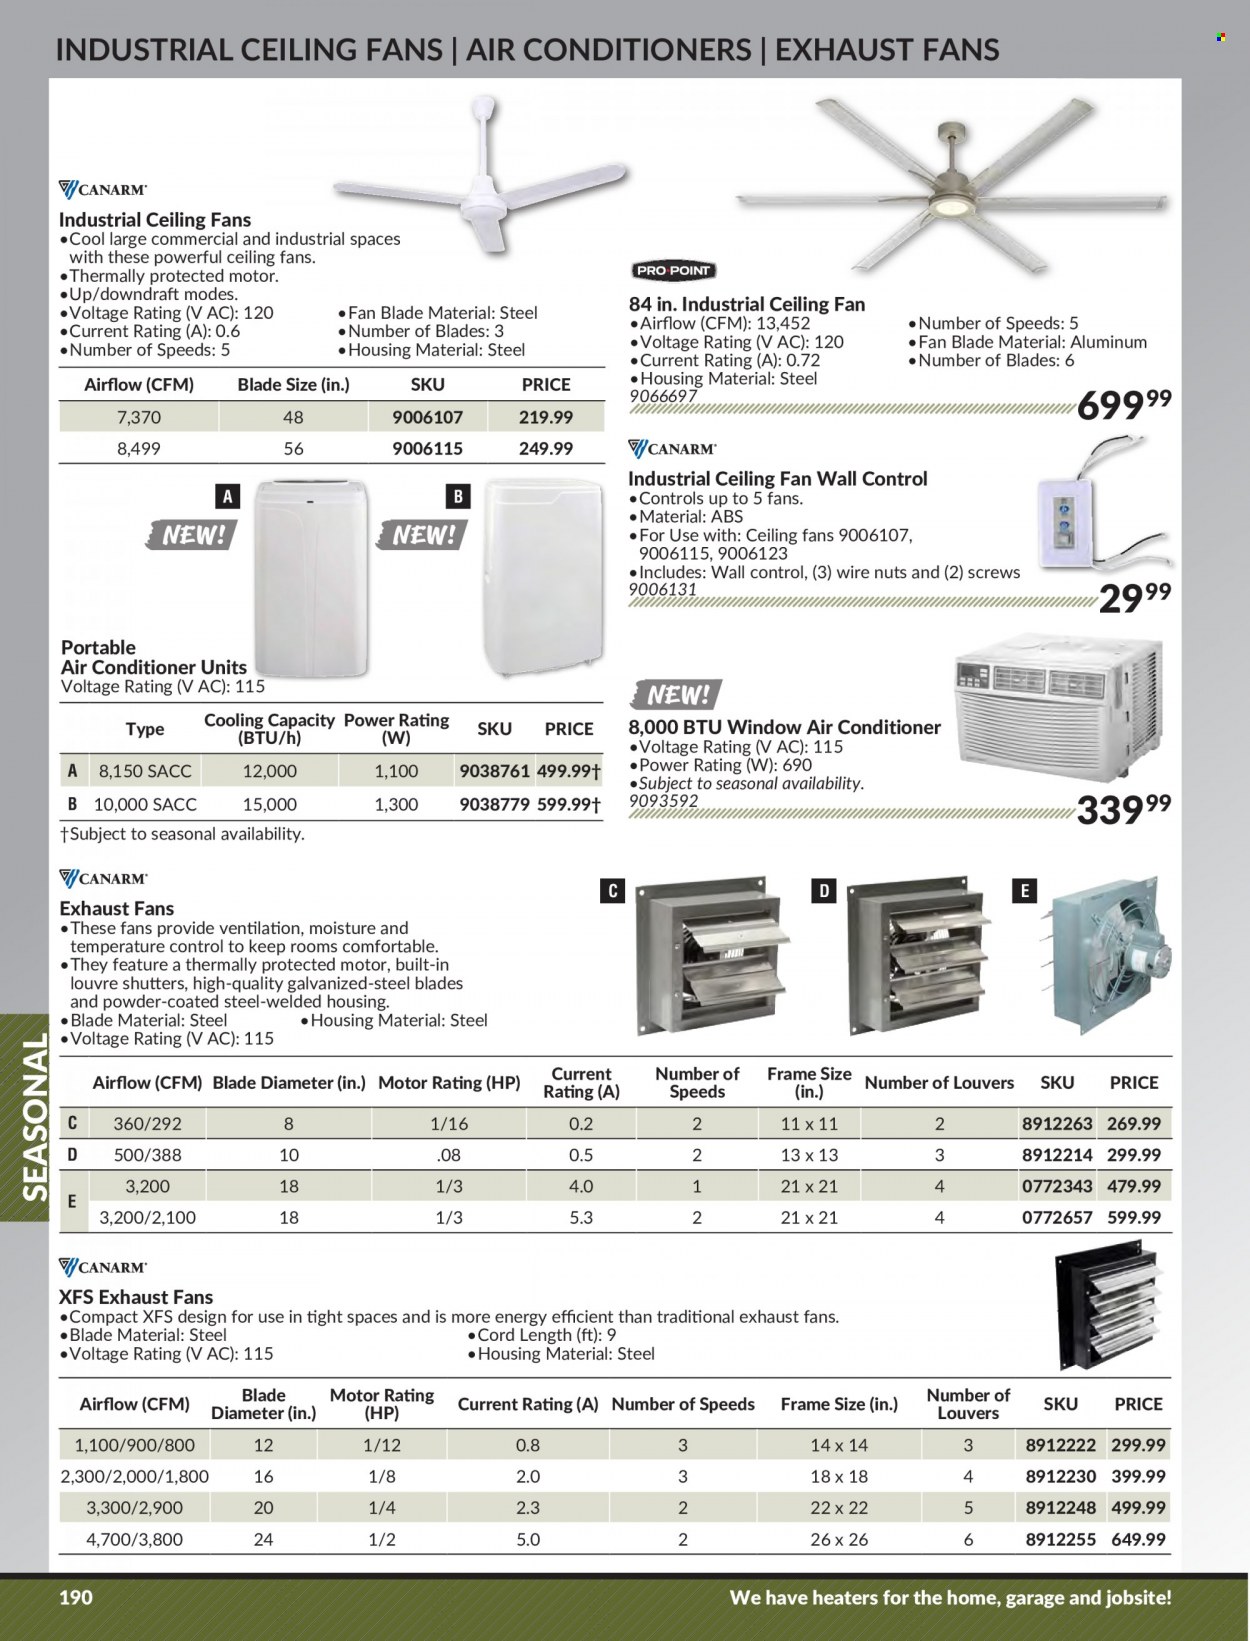 Princess Auto Flyer - Sales products - ceiling fan, heater. Page 196.